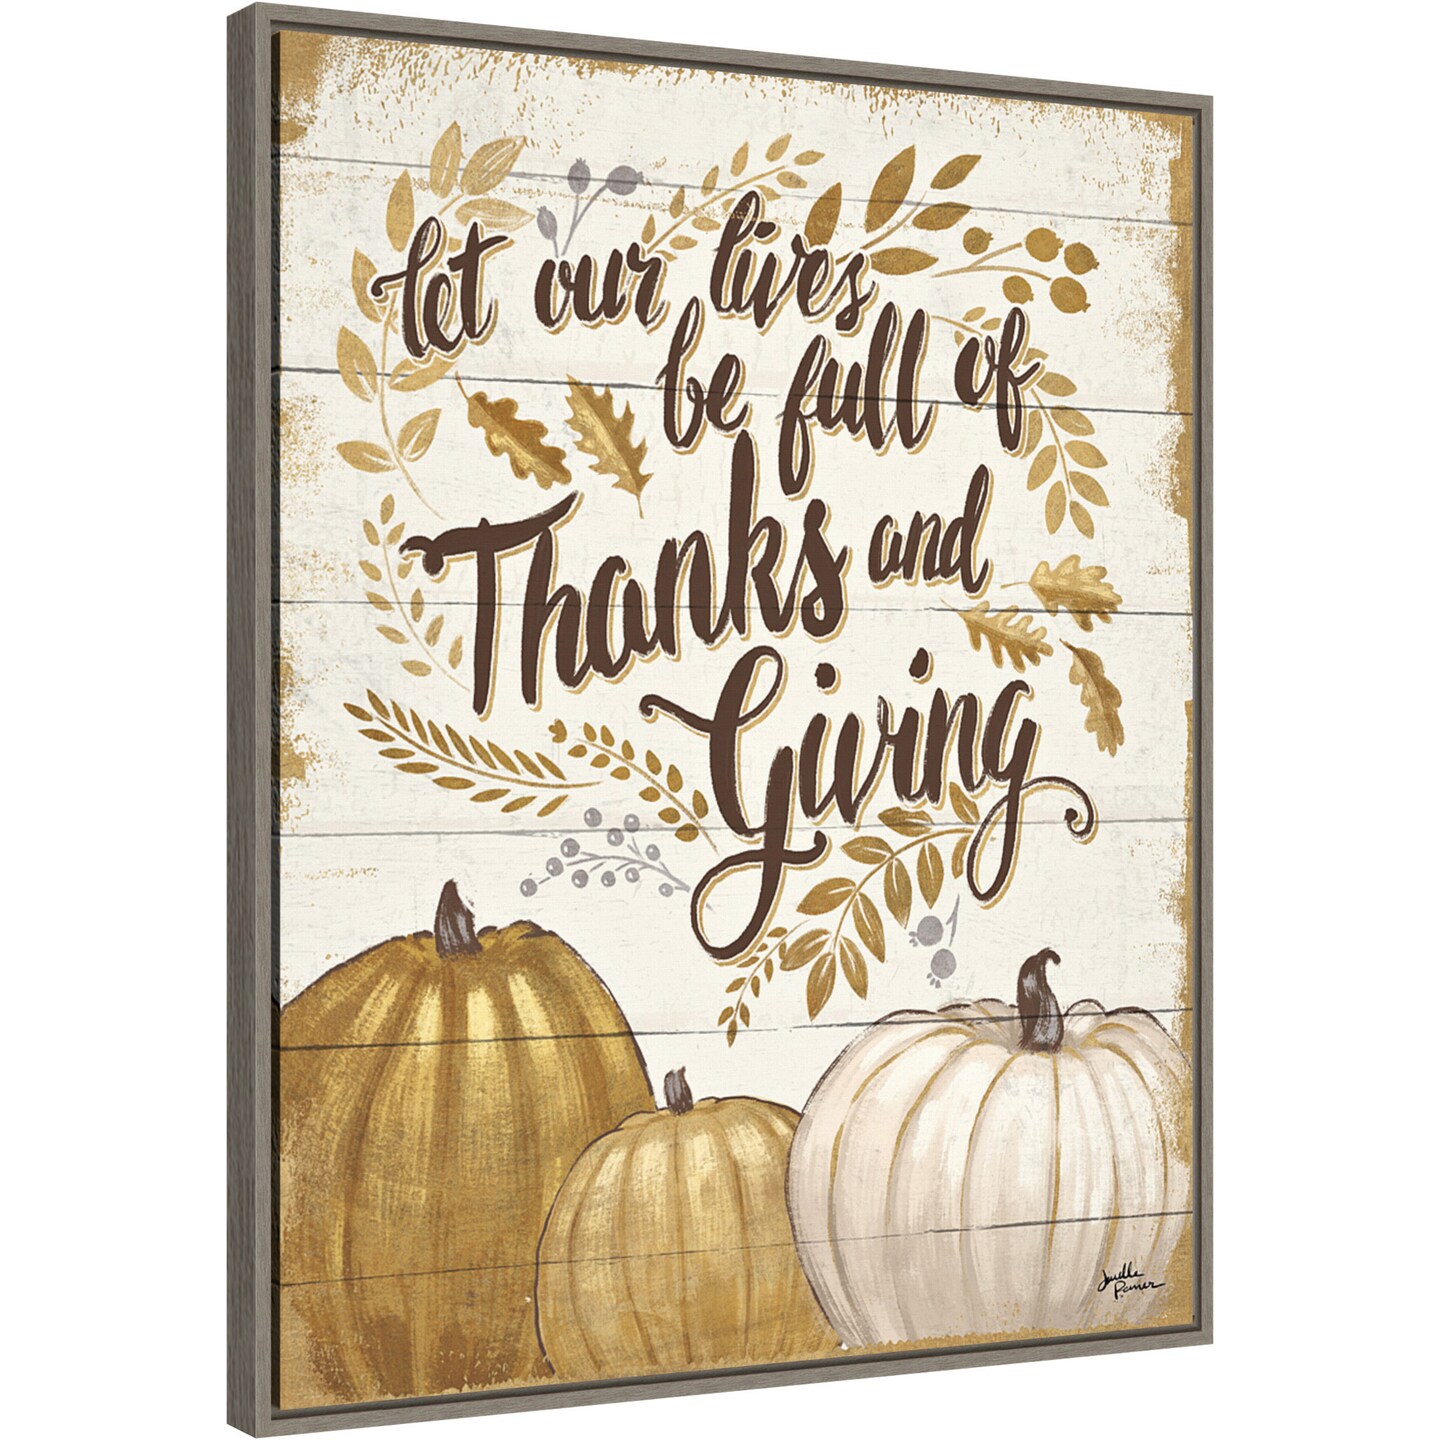 Grateful Season IV by Janelle Penner 23-in. W x 28-in. H. Canvas Wall Art Print Framed in Grey